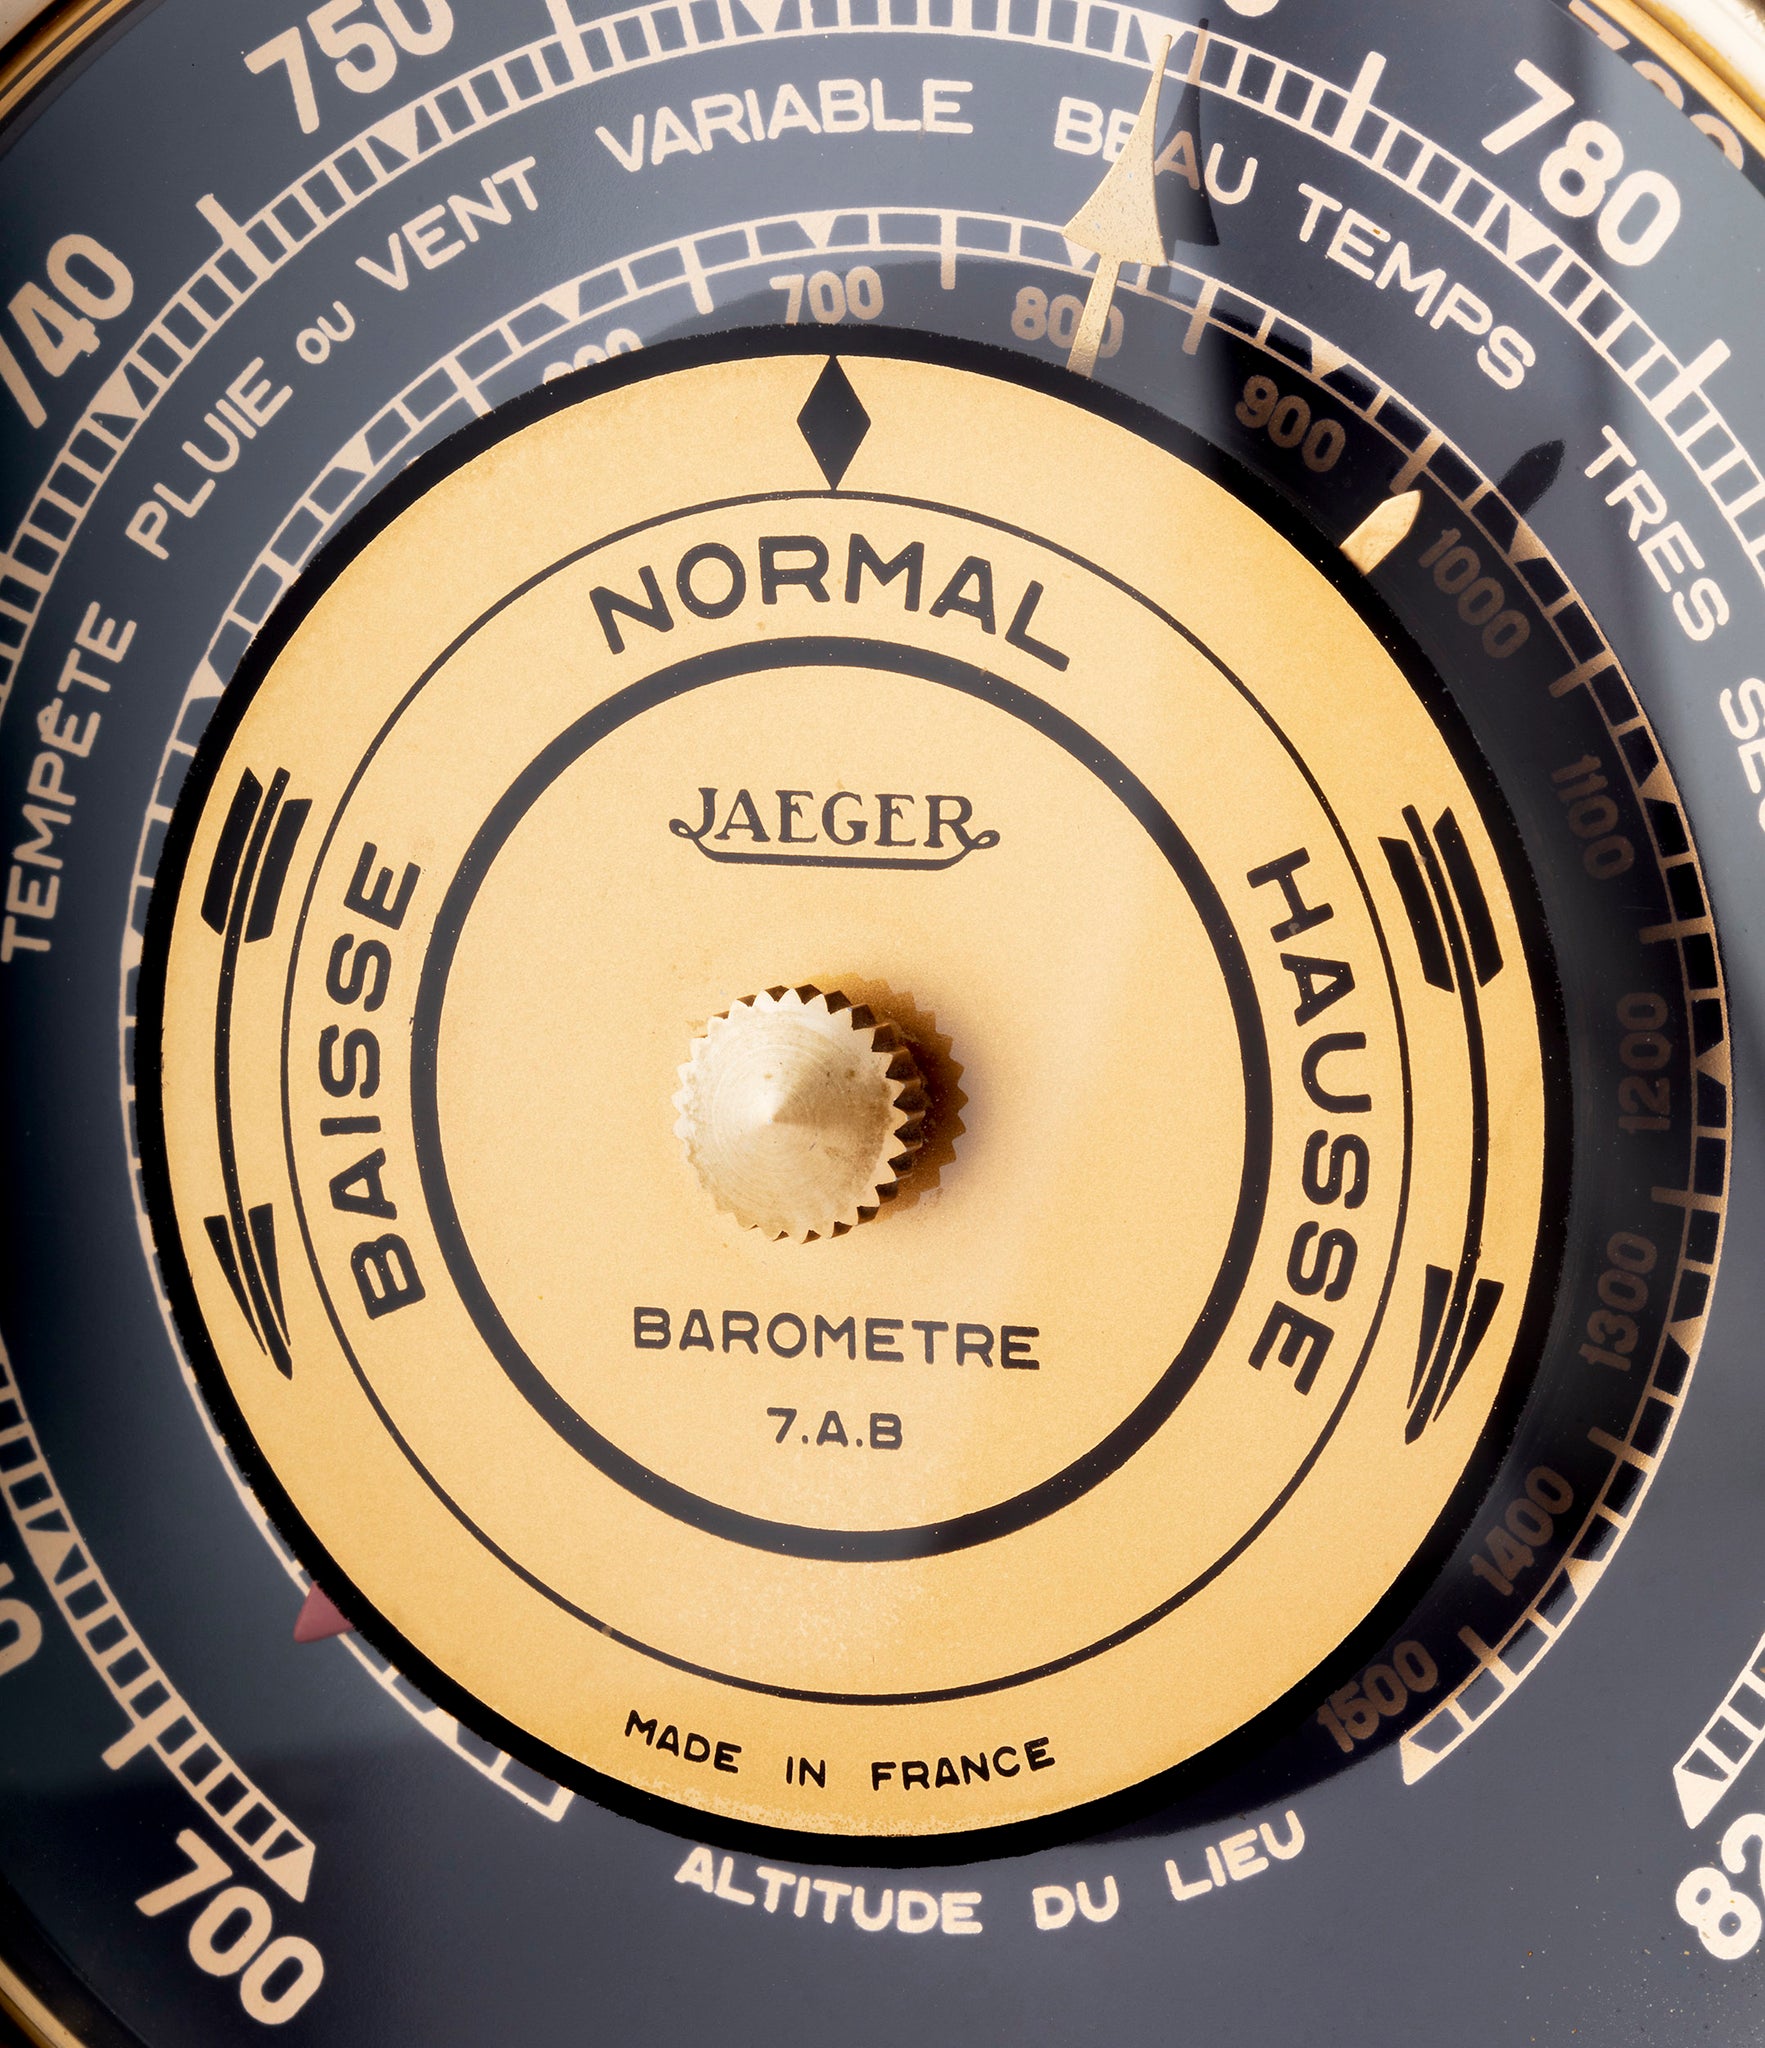 Detail shot of vintage collectable Jaeger barometer available to buy at A Collected Man London